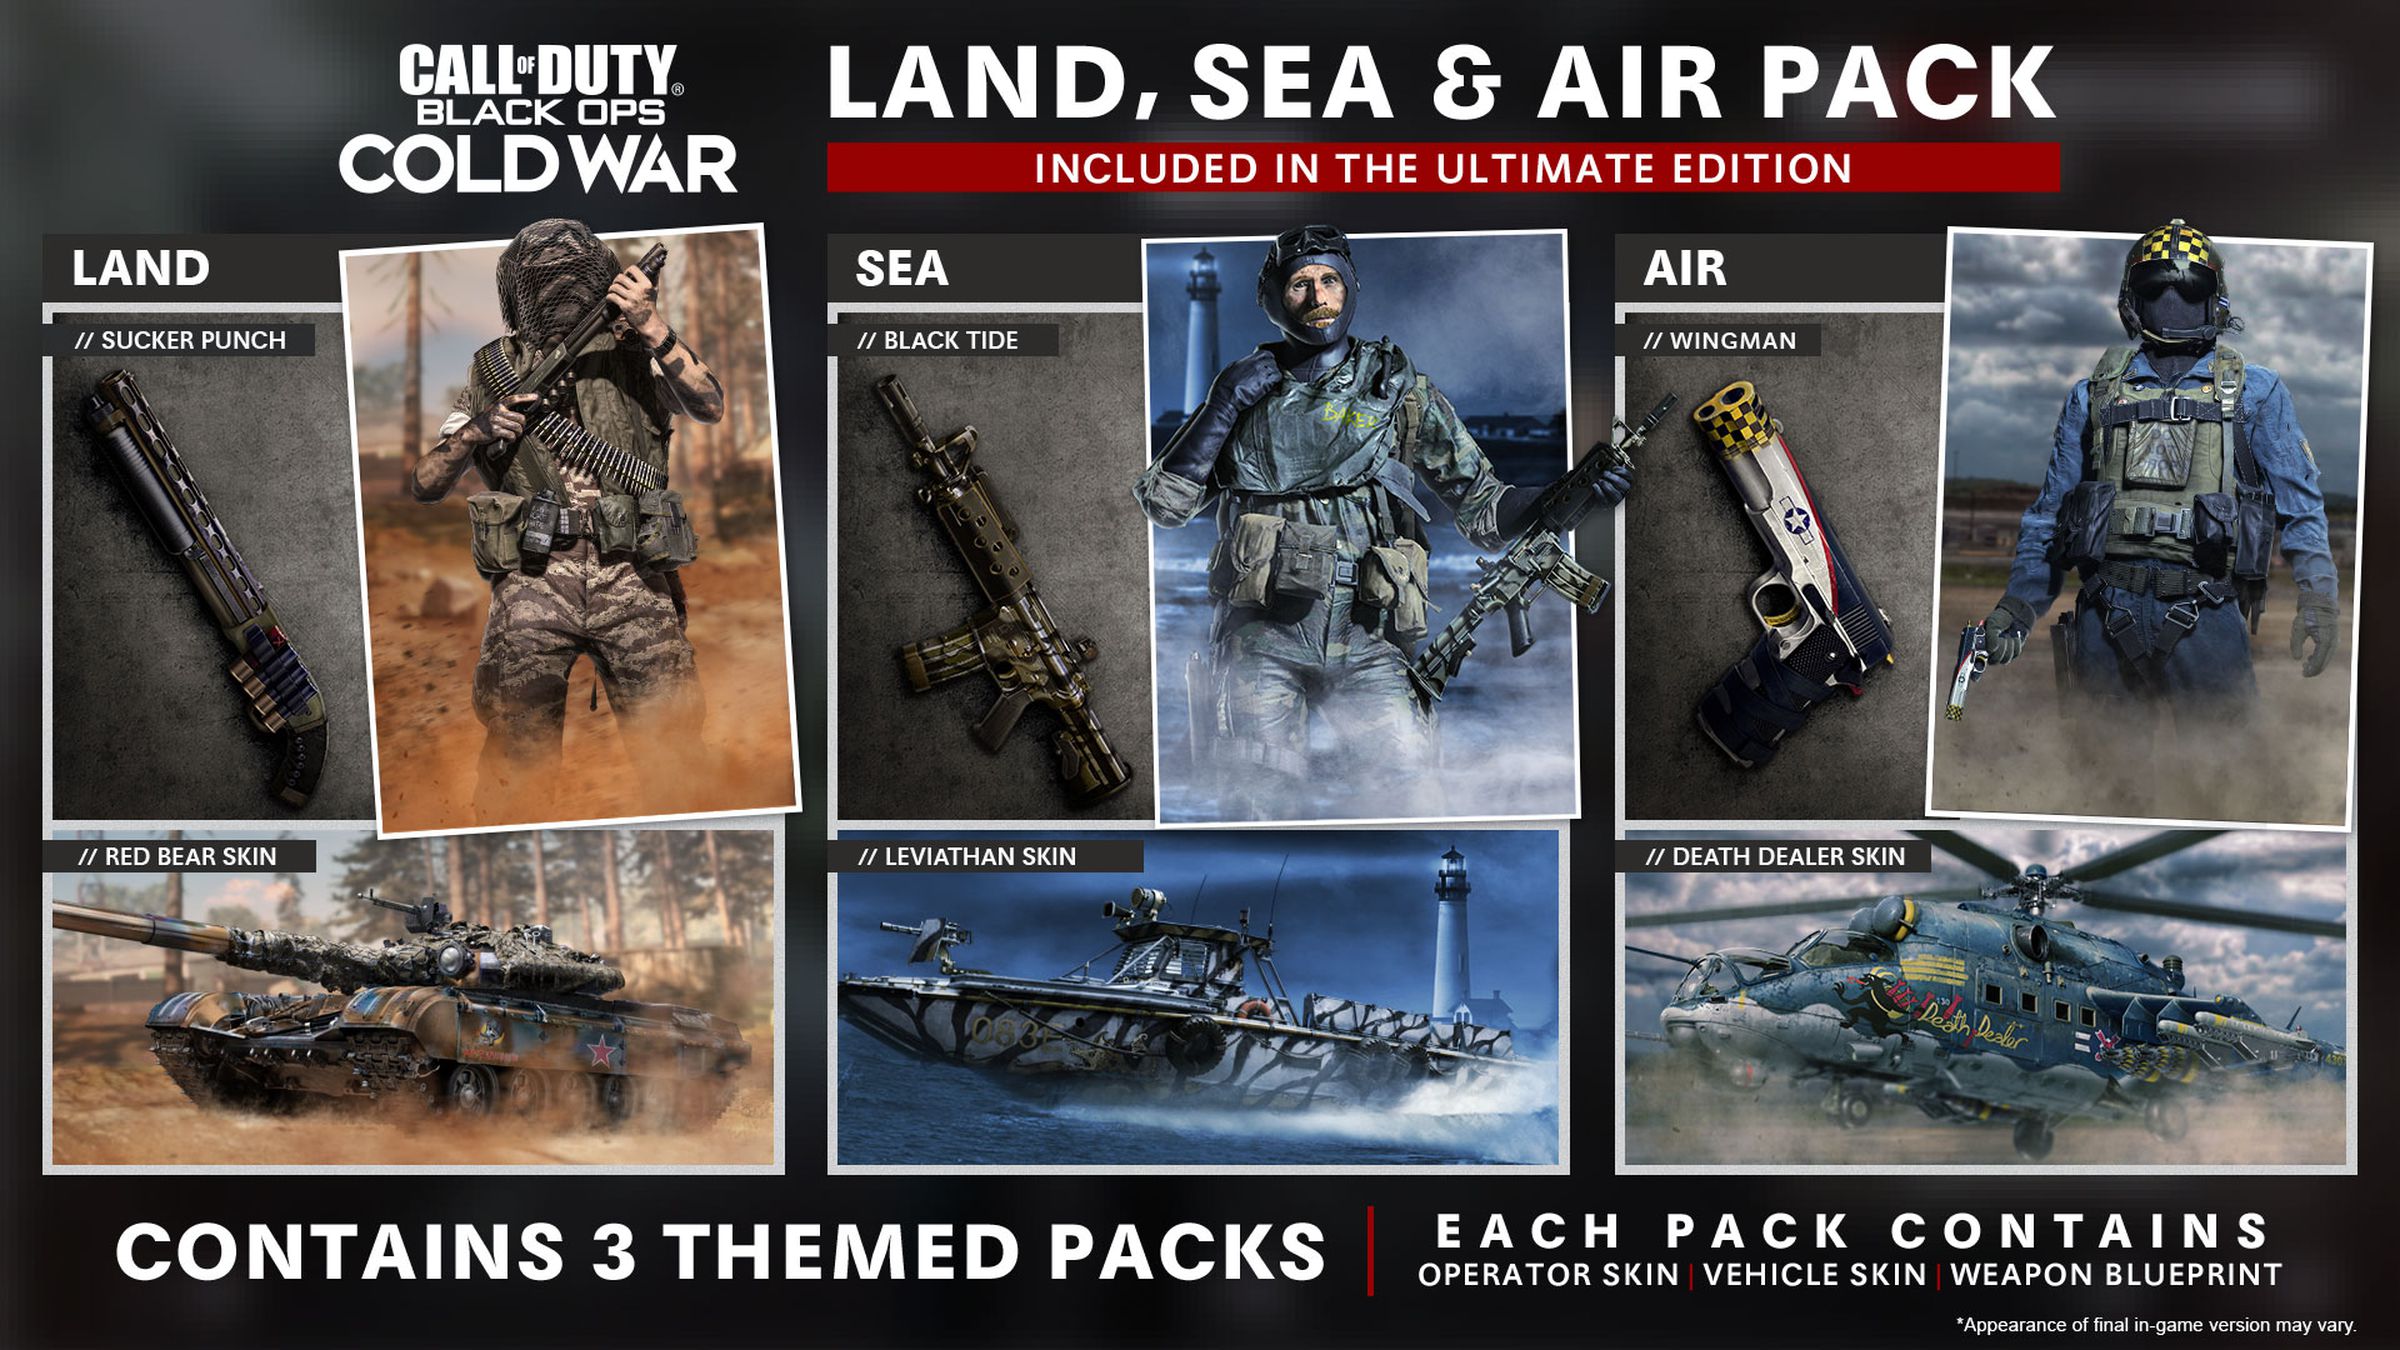 Here’s what you get from the Land, Sea, and Air Pack.